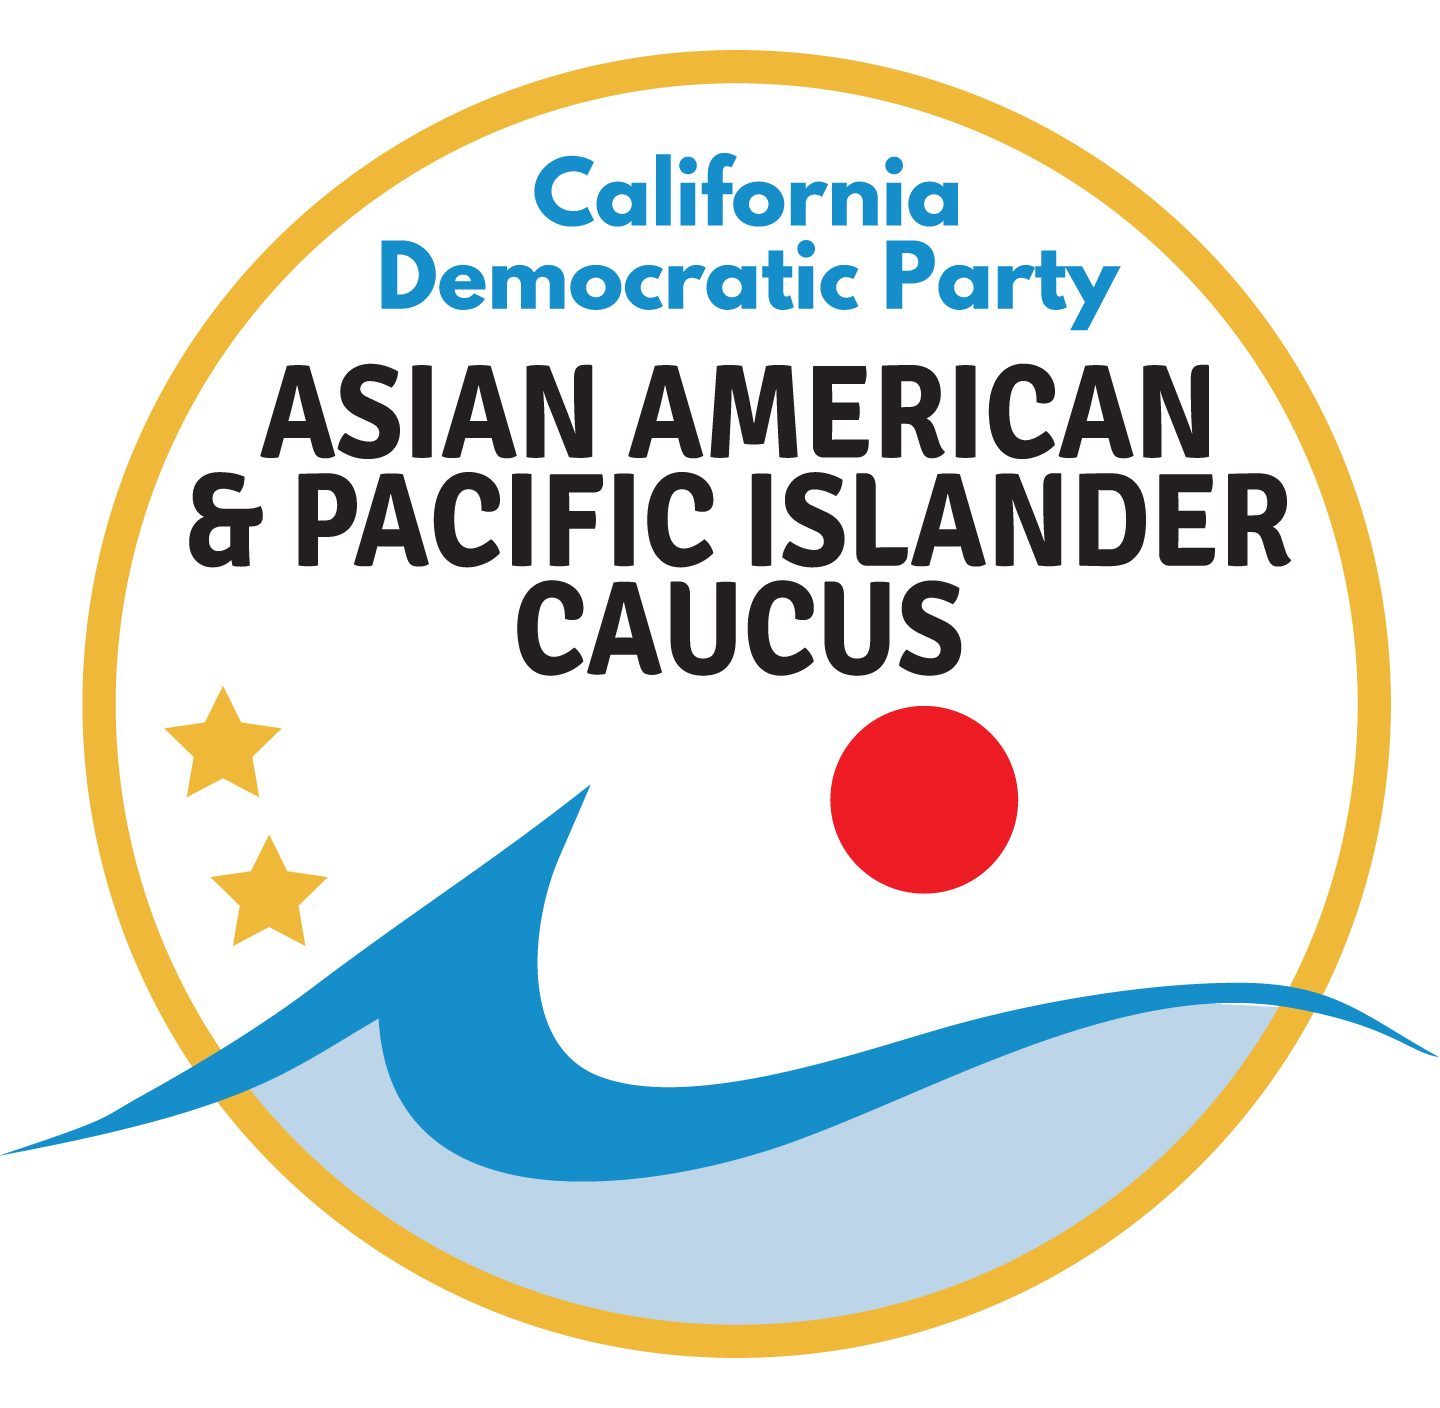 Asian American Pacific Islander Caucus of the California Democratic Party logo. Blue wave and gold circle